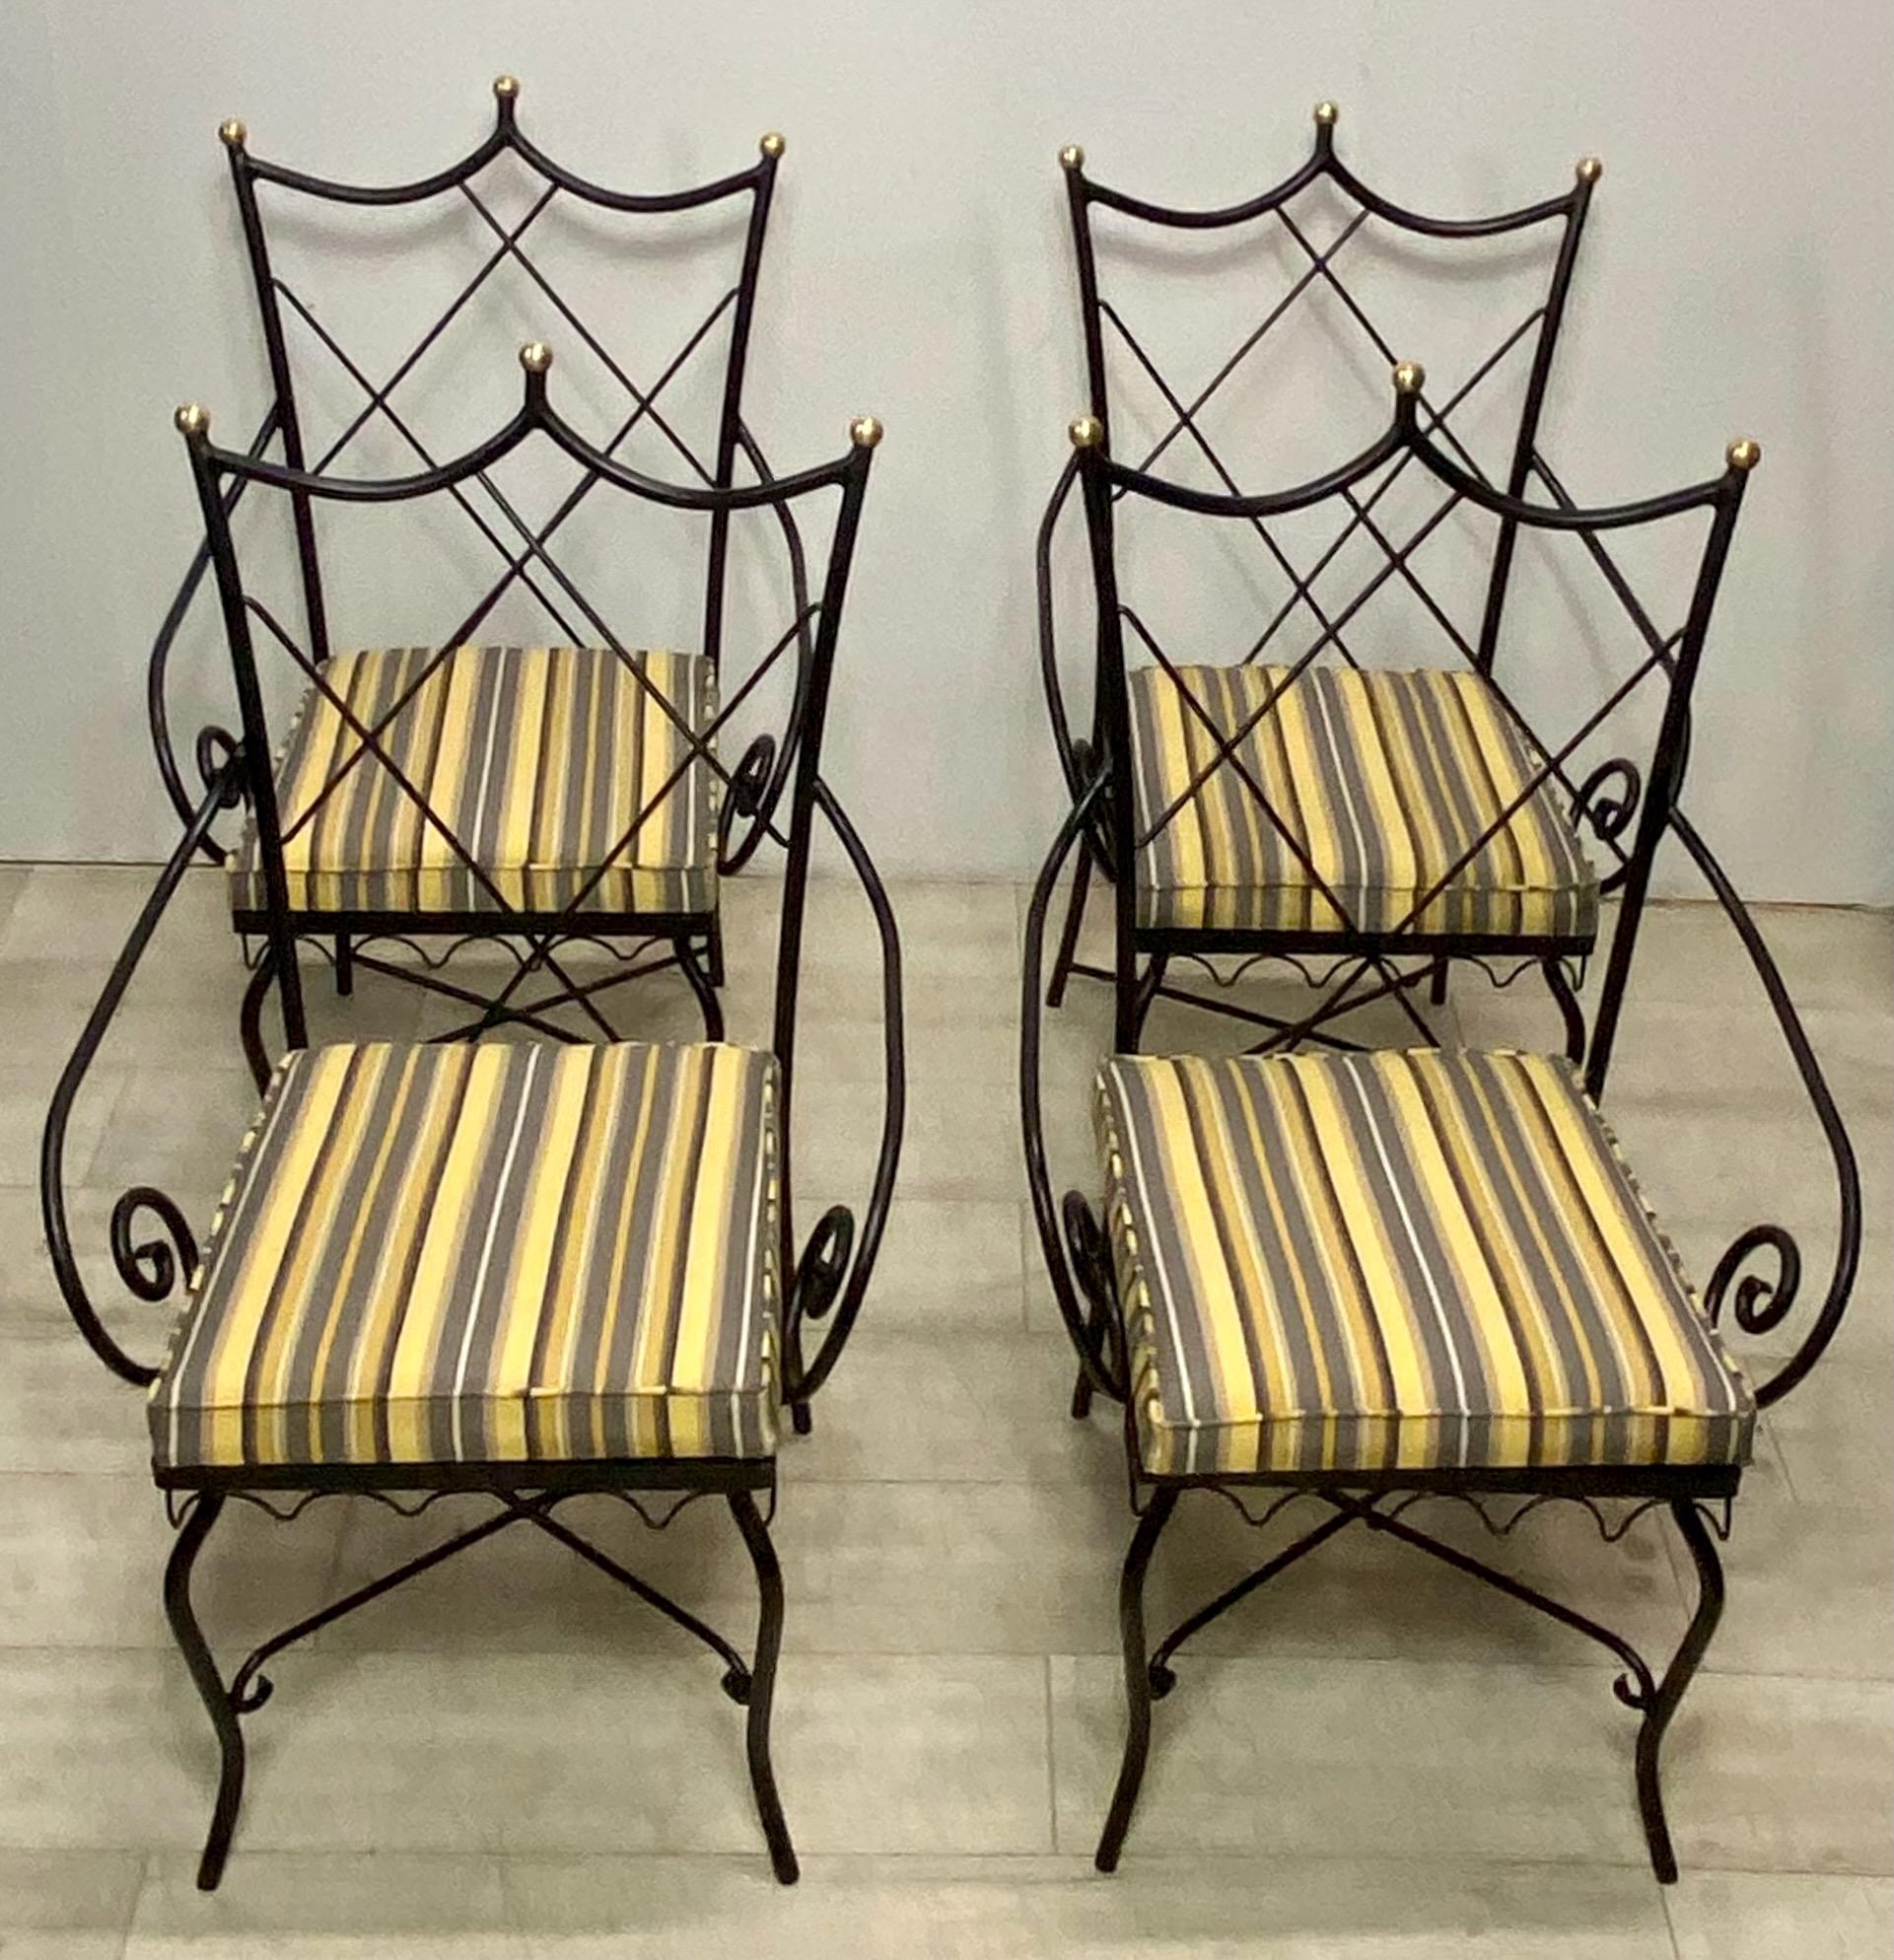 A set of 4 Hollywood Regency style patio chairs.
Freshly painted black iron with polished brass finial detail and new outdoor water repellant upholstered cushions.
Set consists of two armchairs and two side chairs.
Mid Century, 1930-1960.
In